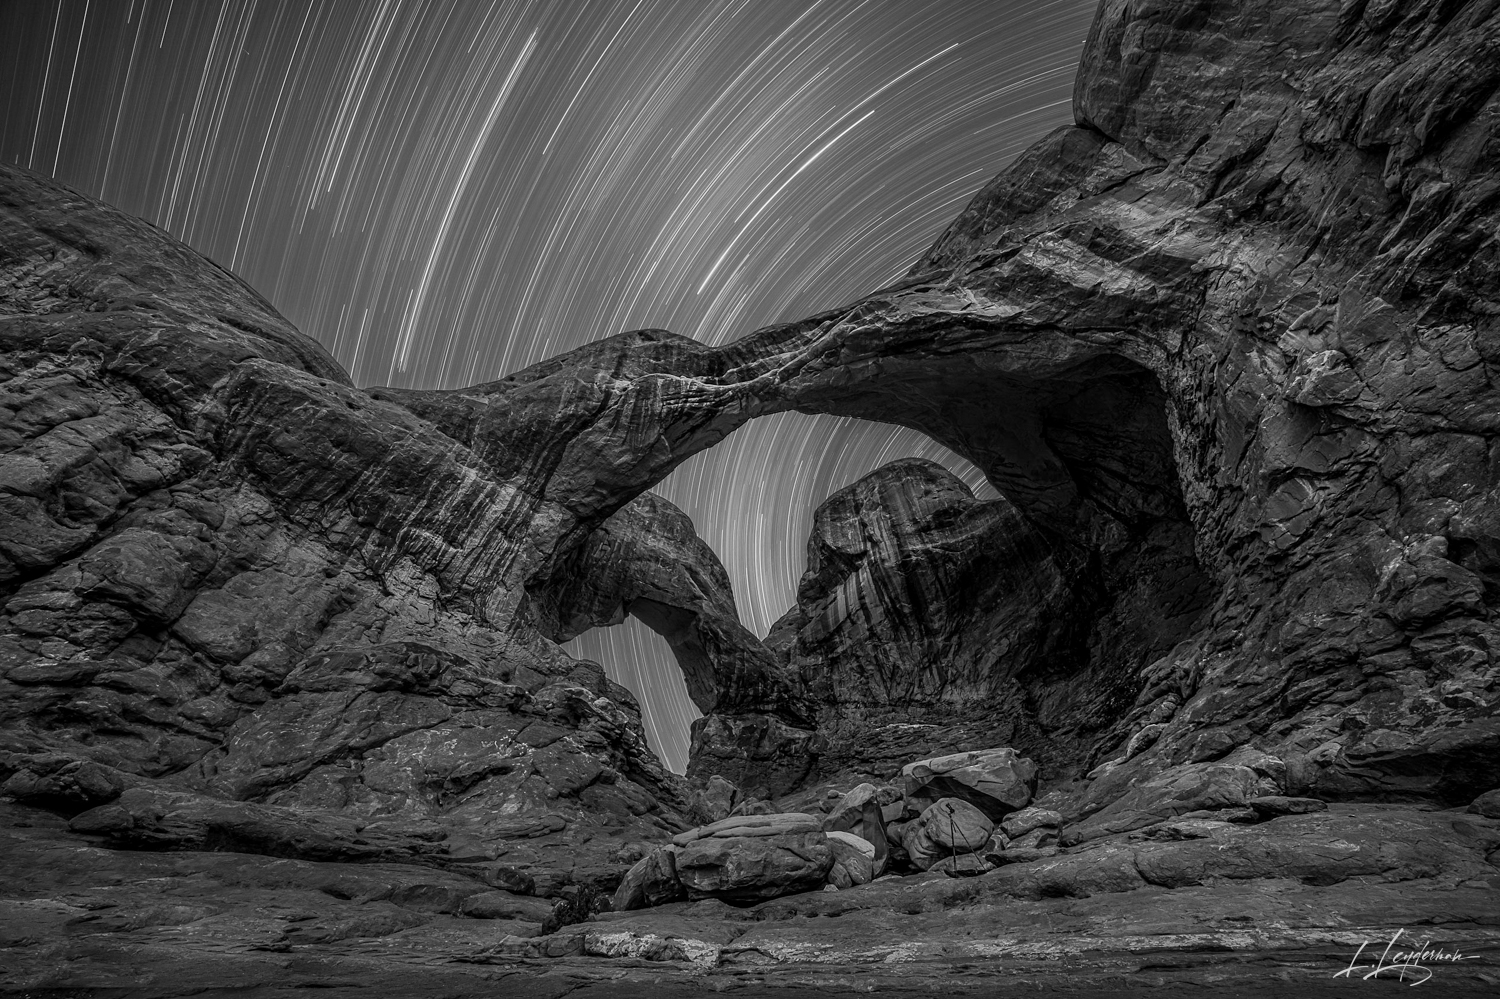 Earth and sky converge in this sculpture of night, where the rock arch gives shape to the intangible journey of stars, etching...